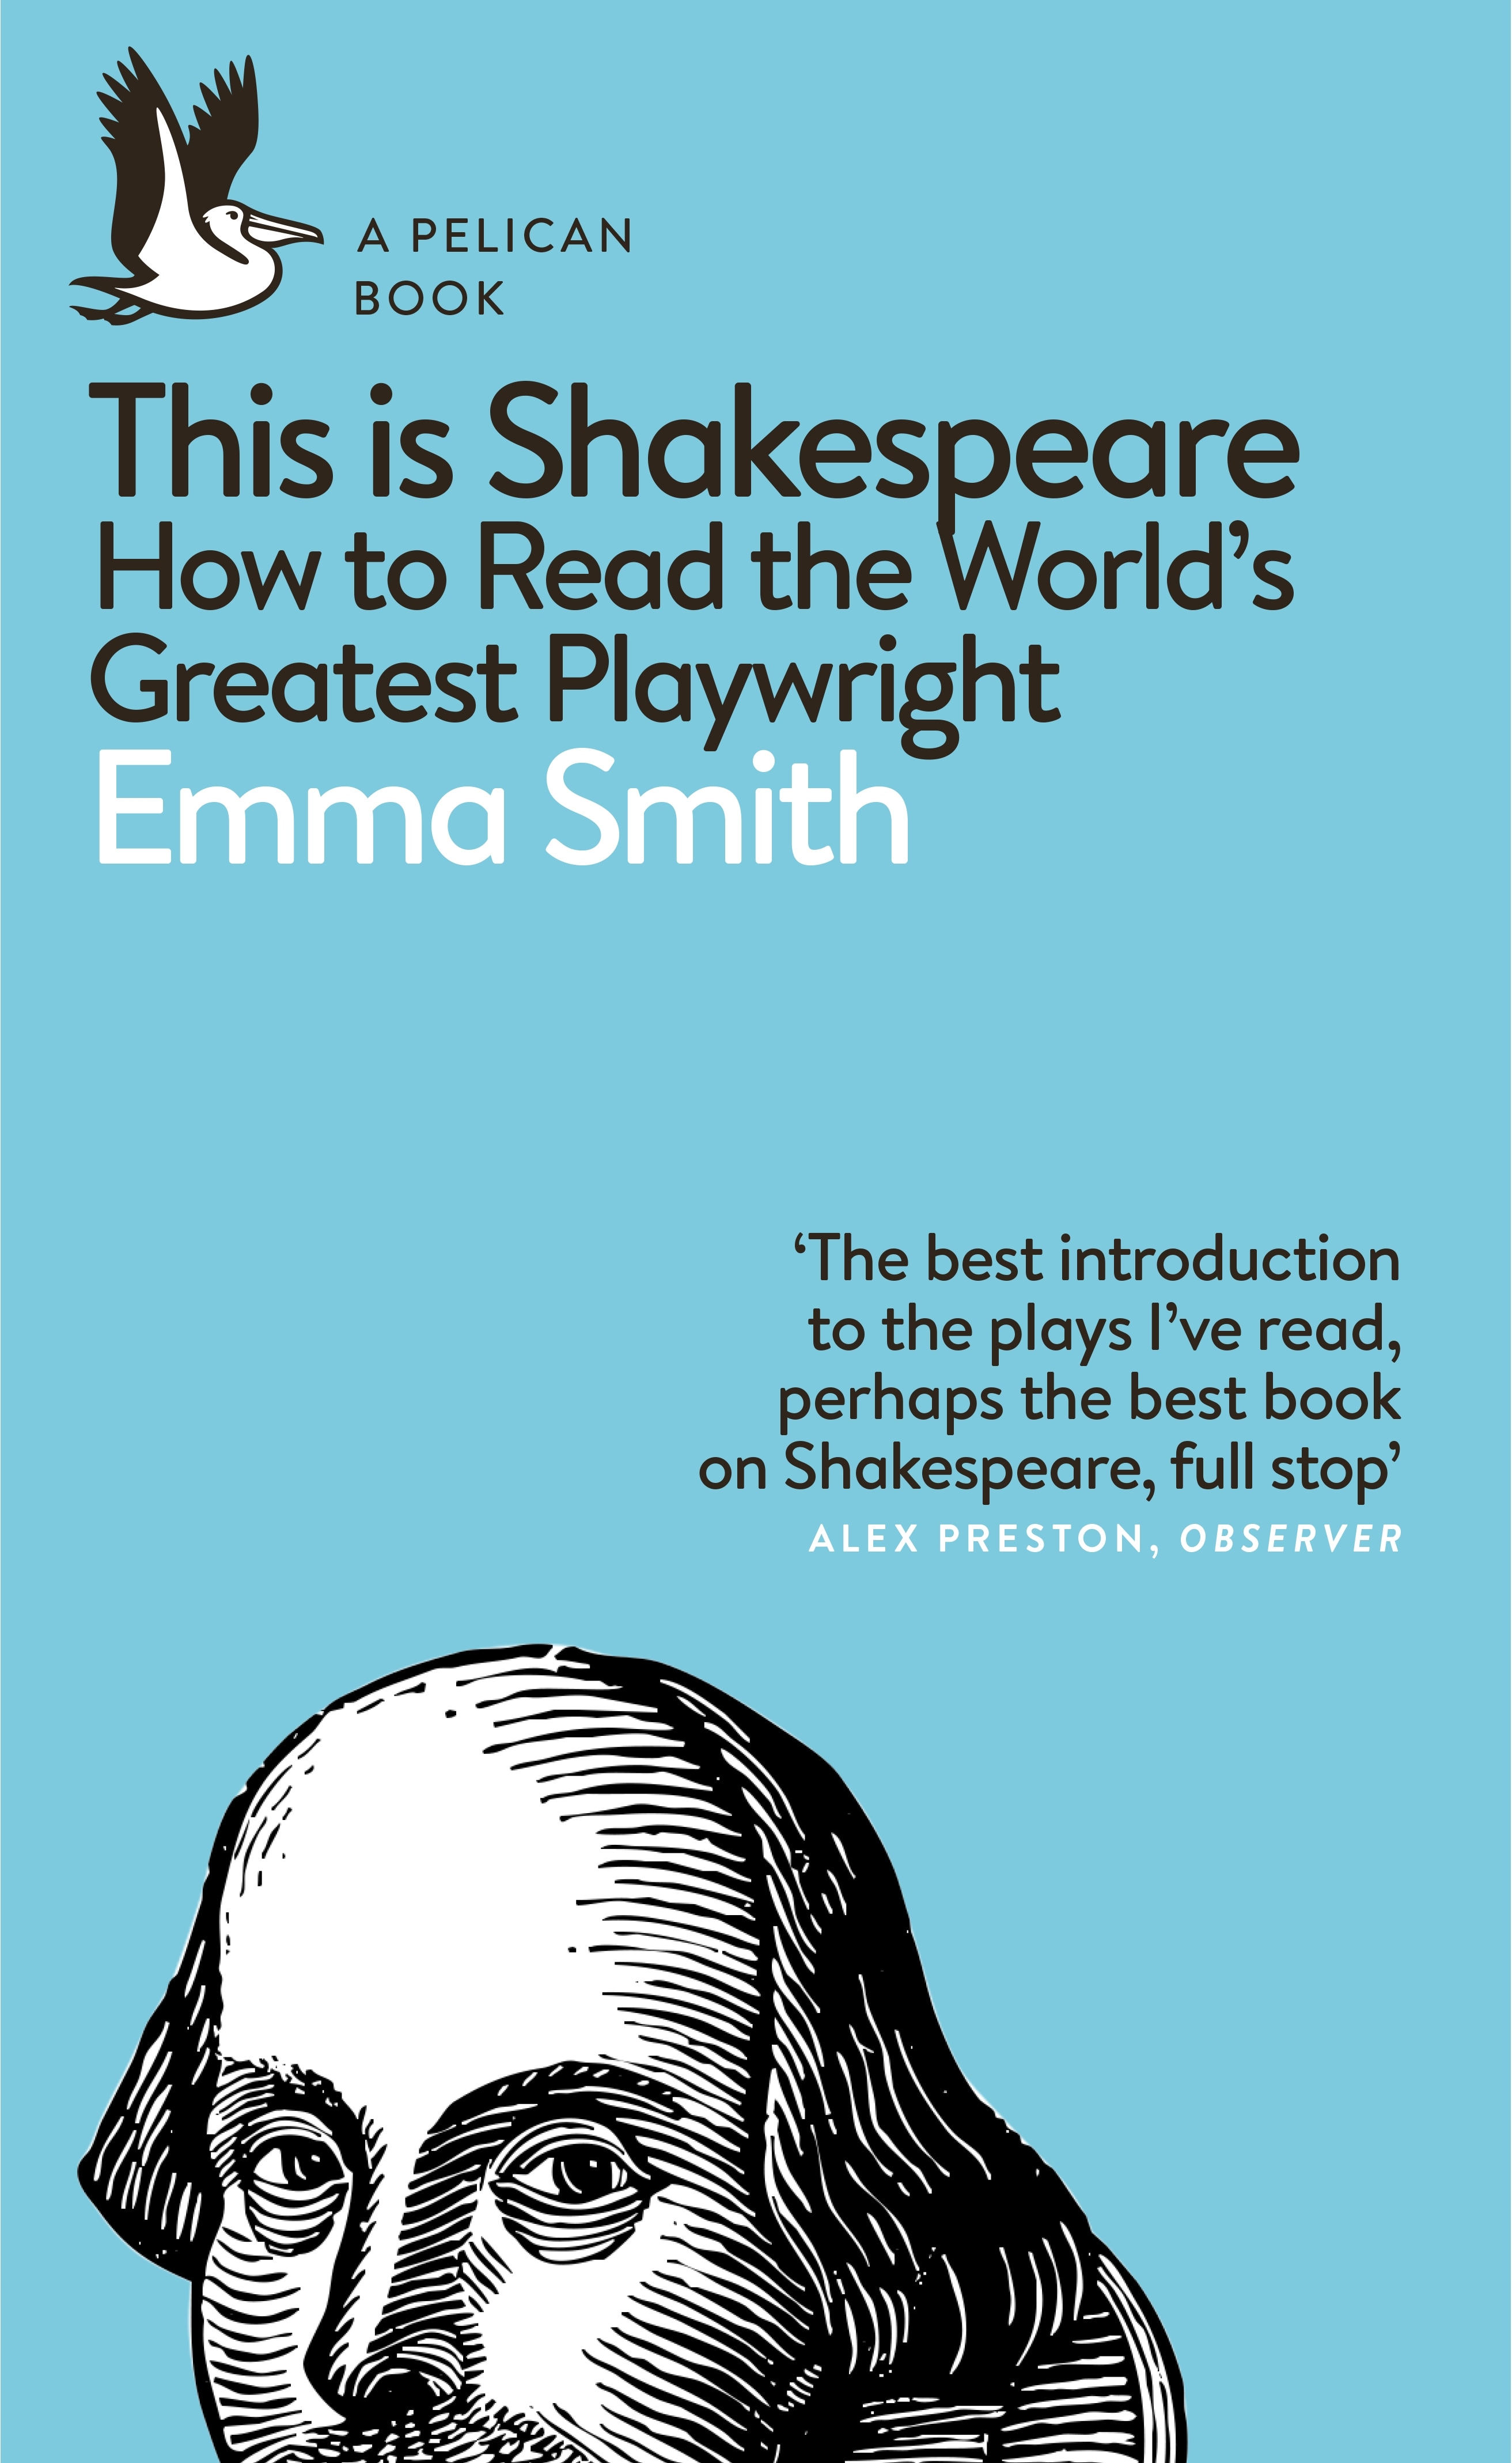 Book “This Is Shakespeare” by Emma Smith — April 2, 2020